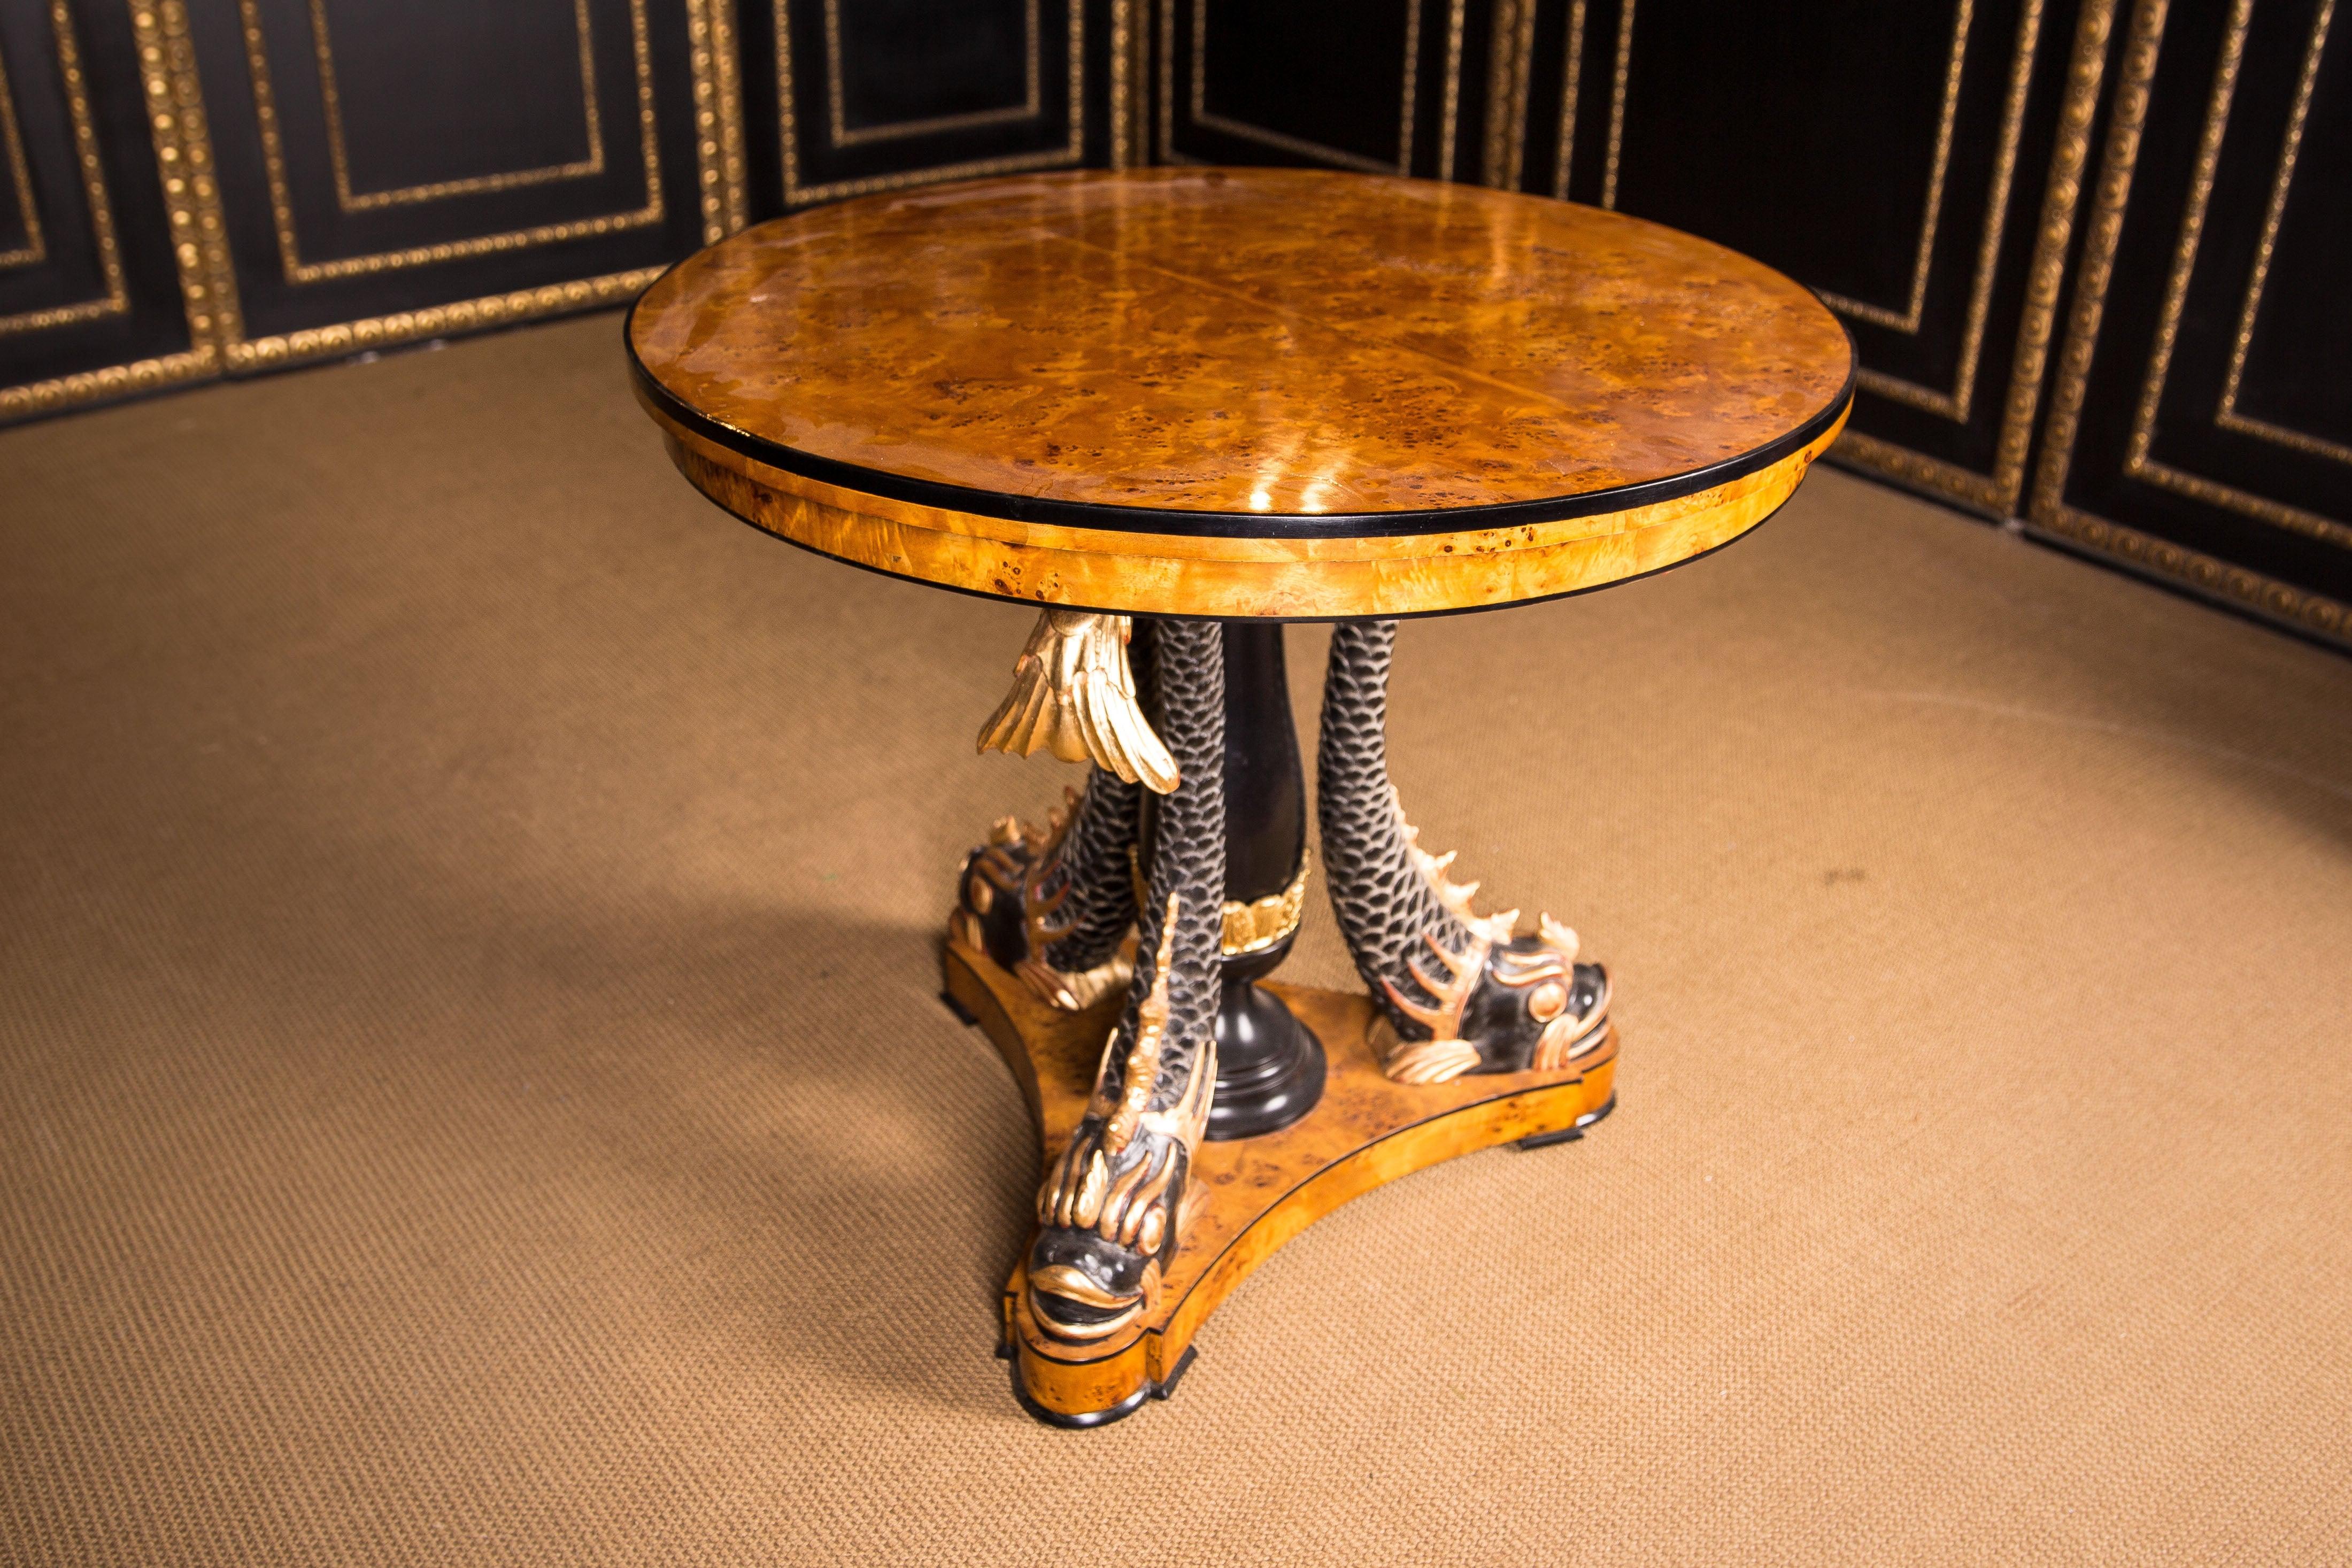 Majestic Table with Dolphins in the Antique Empire Style Birdseye maple carved For Sale 1